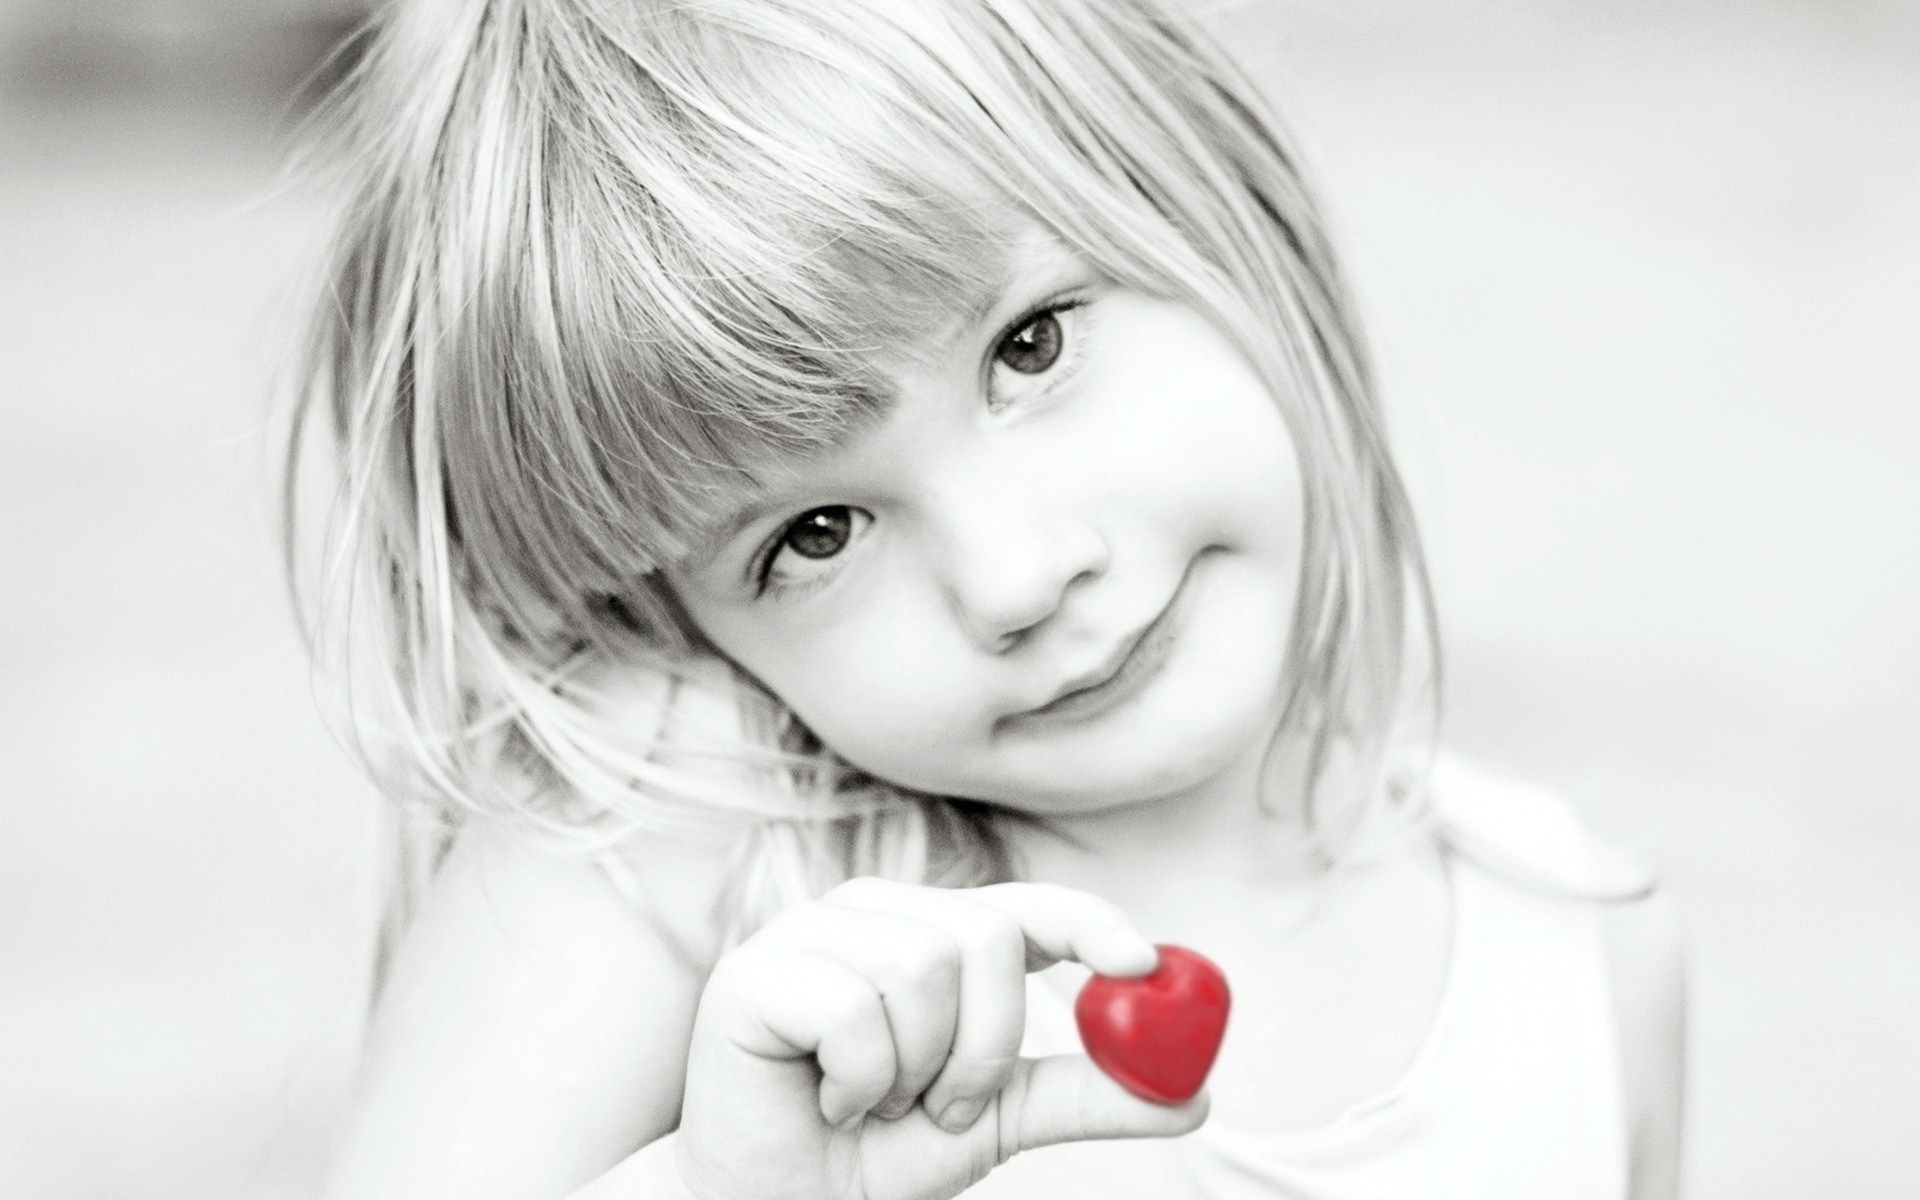 Child Girl With Red Heart Wallpaper | Cute Baby Wallpapers